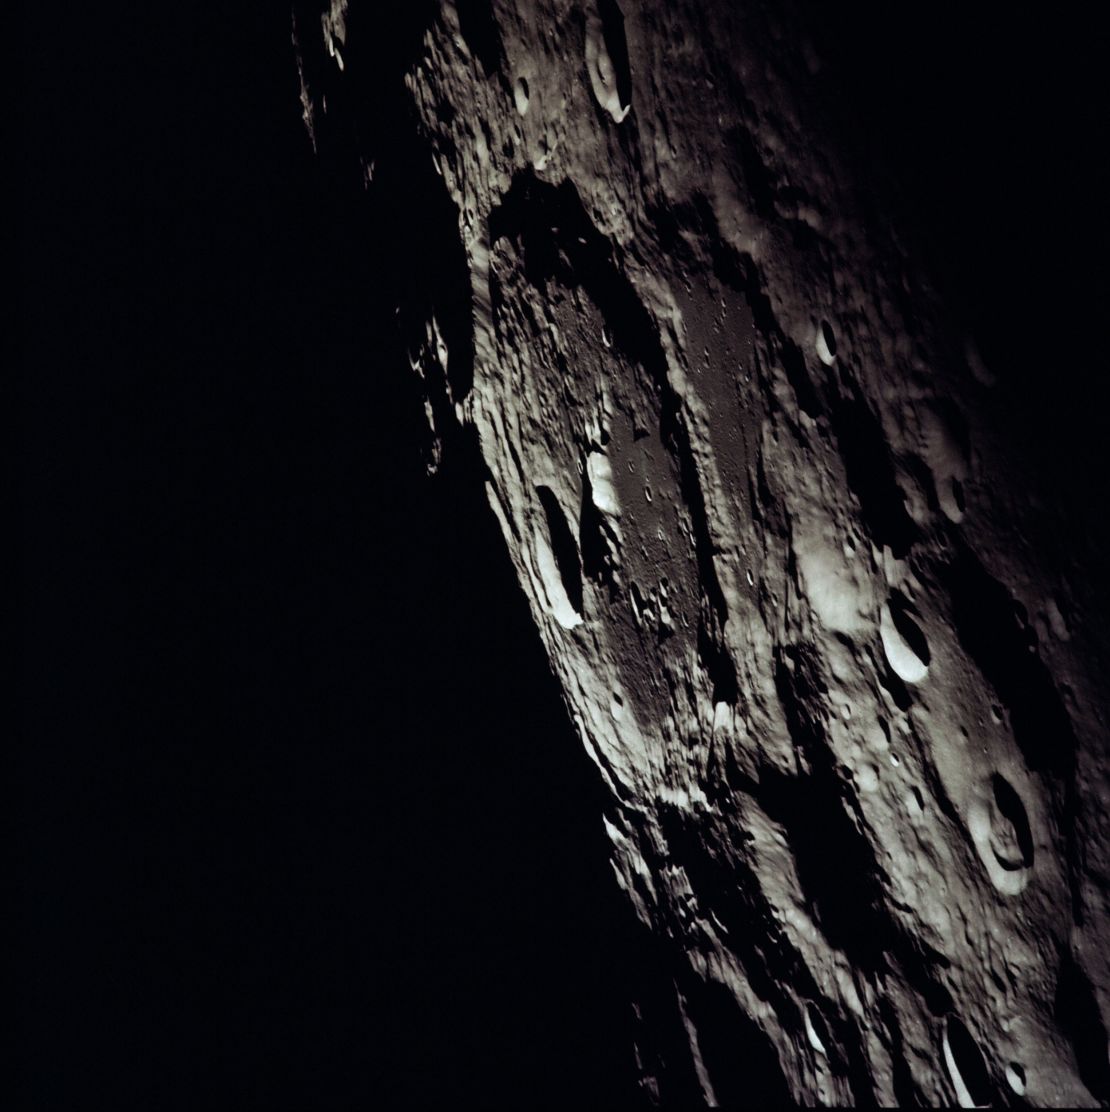 The astronauts captured this image of Crater No. 302 on the farside of the moon. 